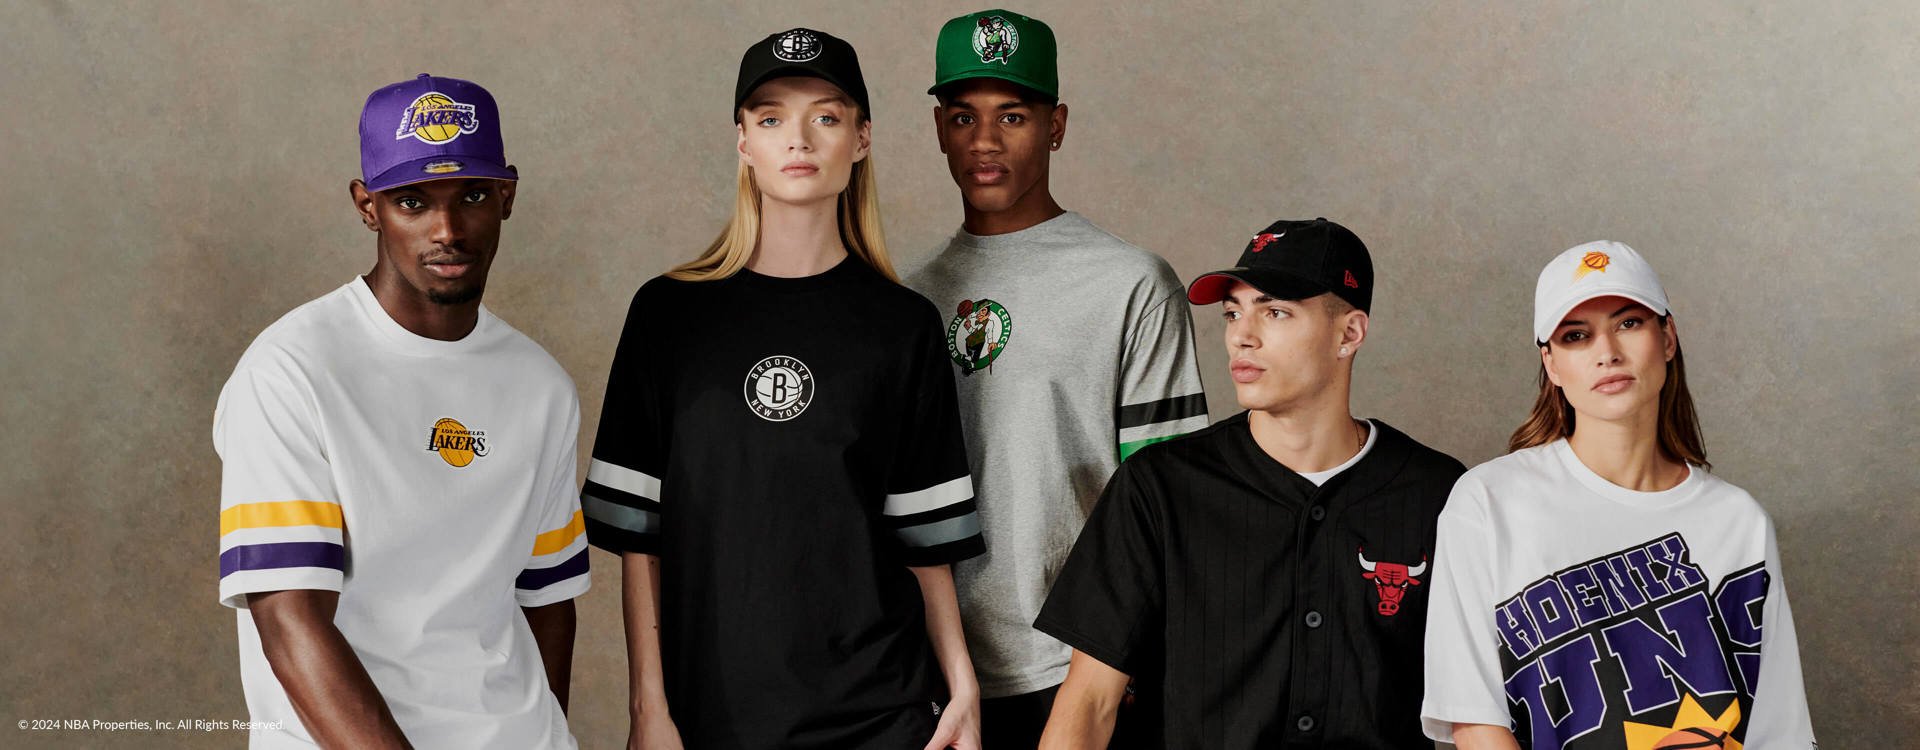 two females and three males wearing new era's nba caps and tops